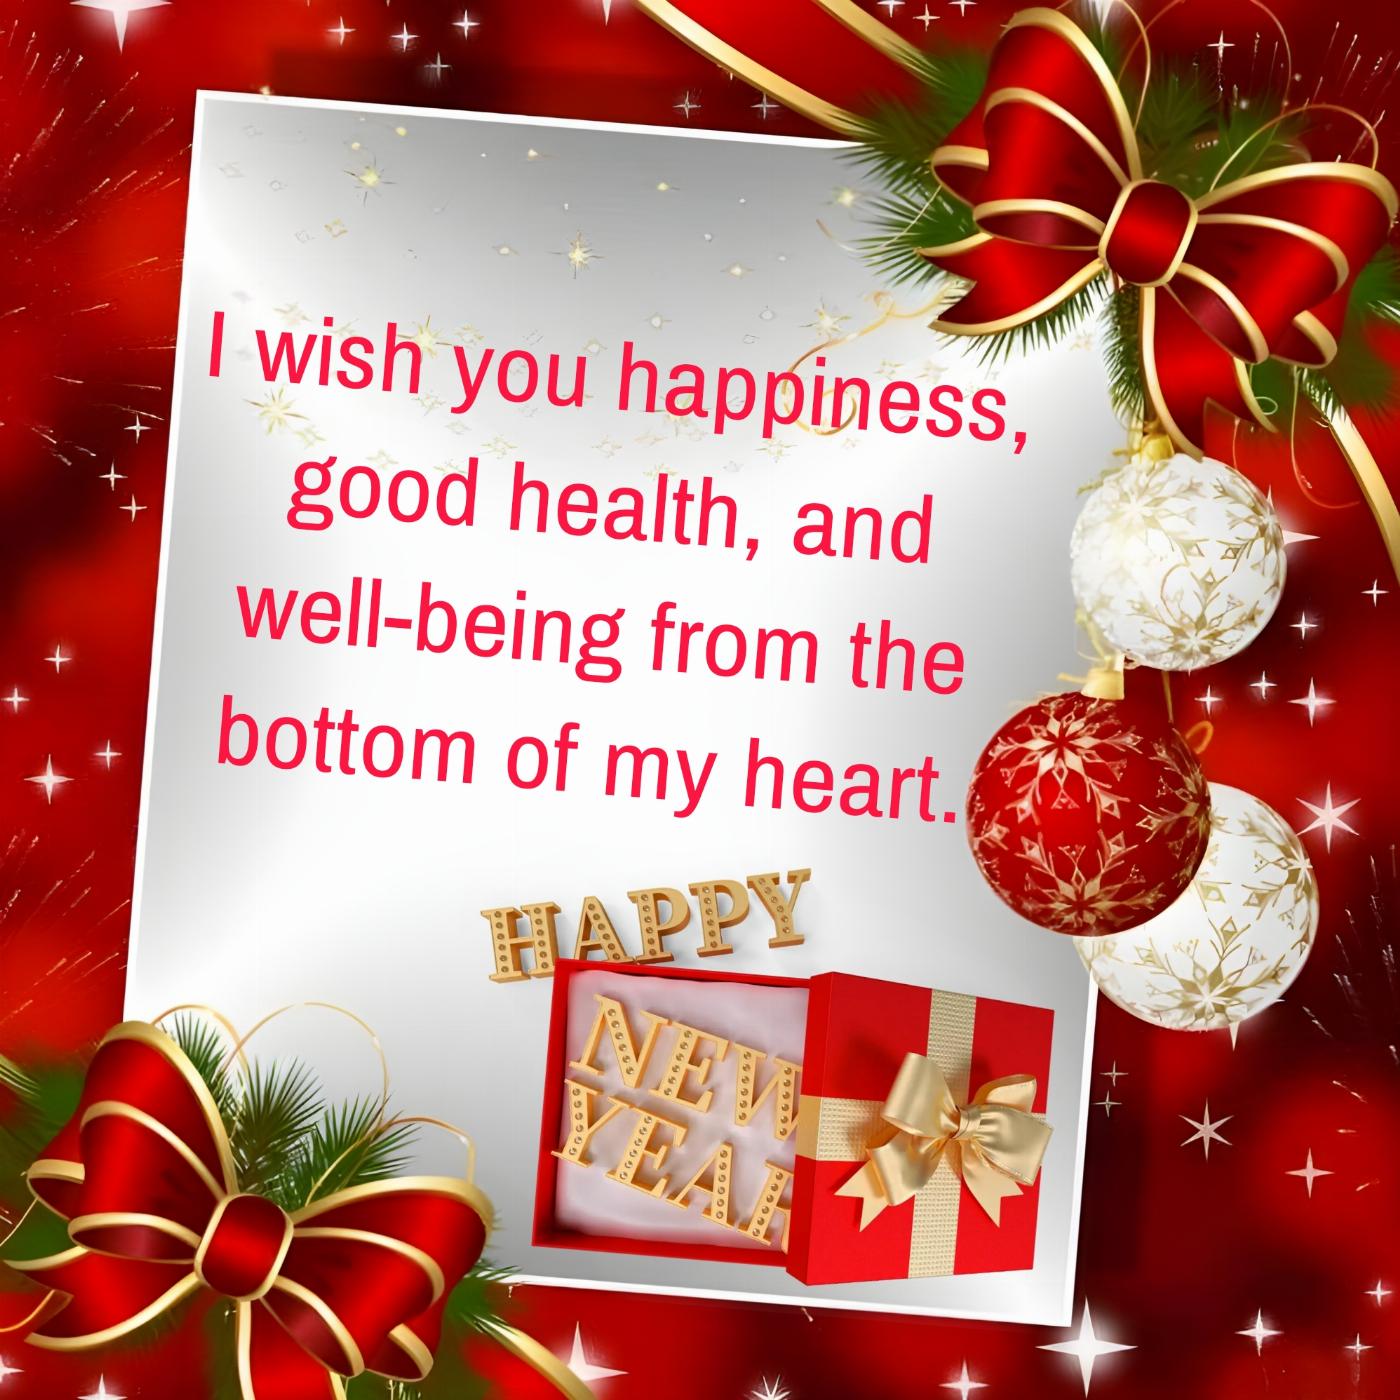 I wish you happiness good health and well-being